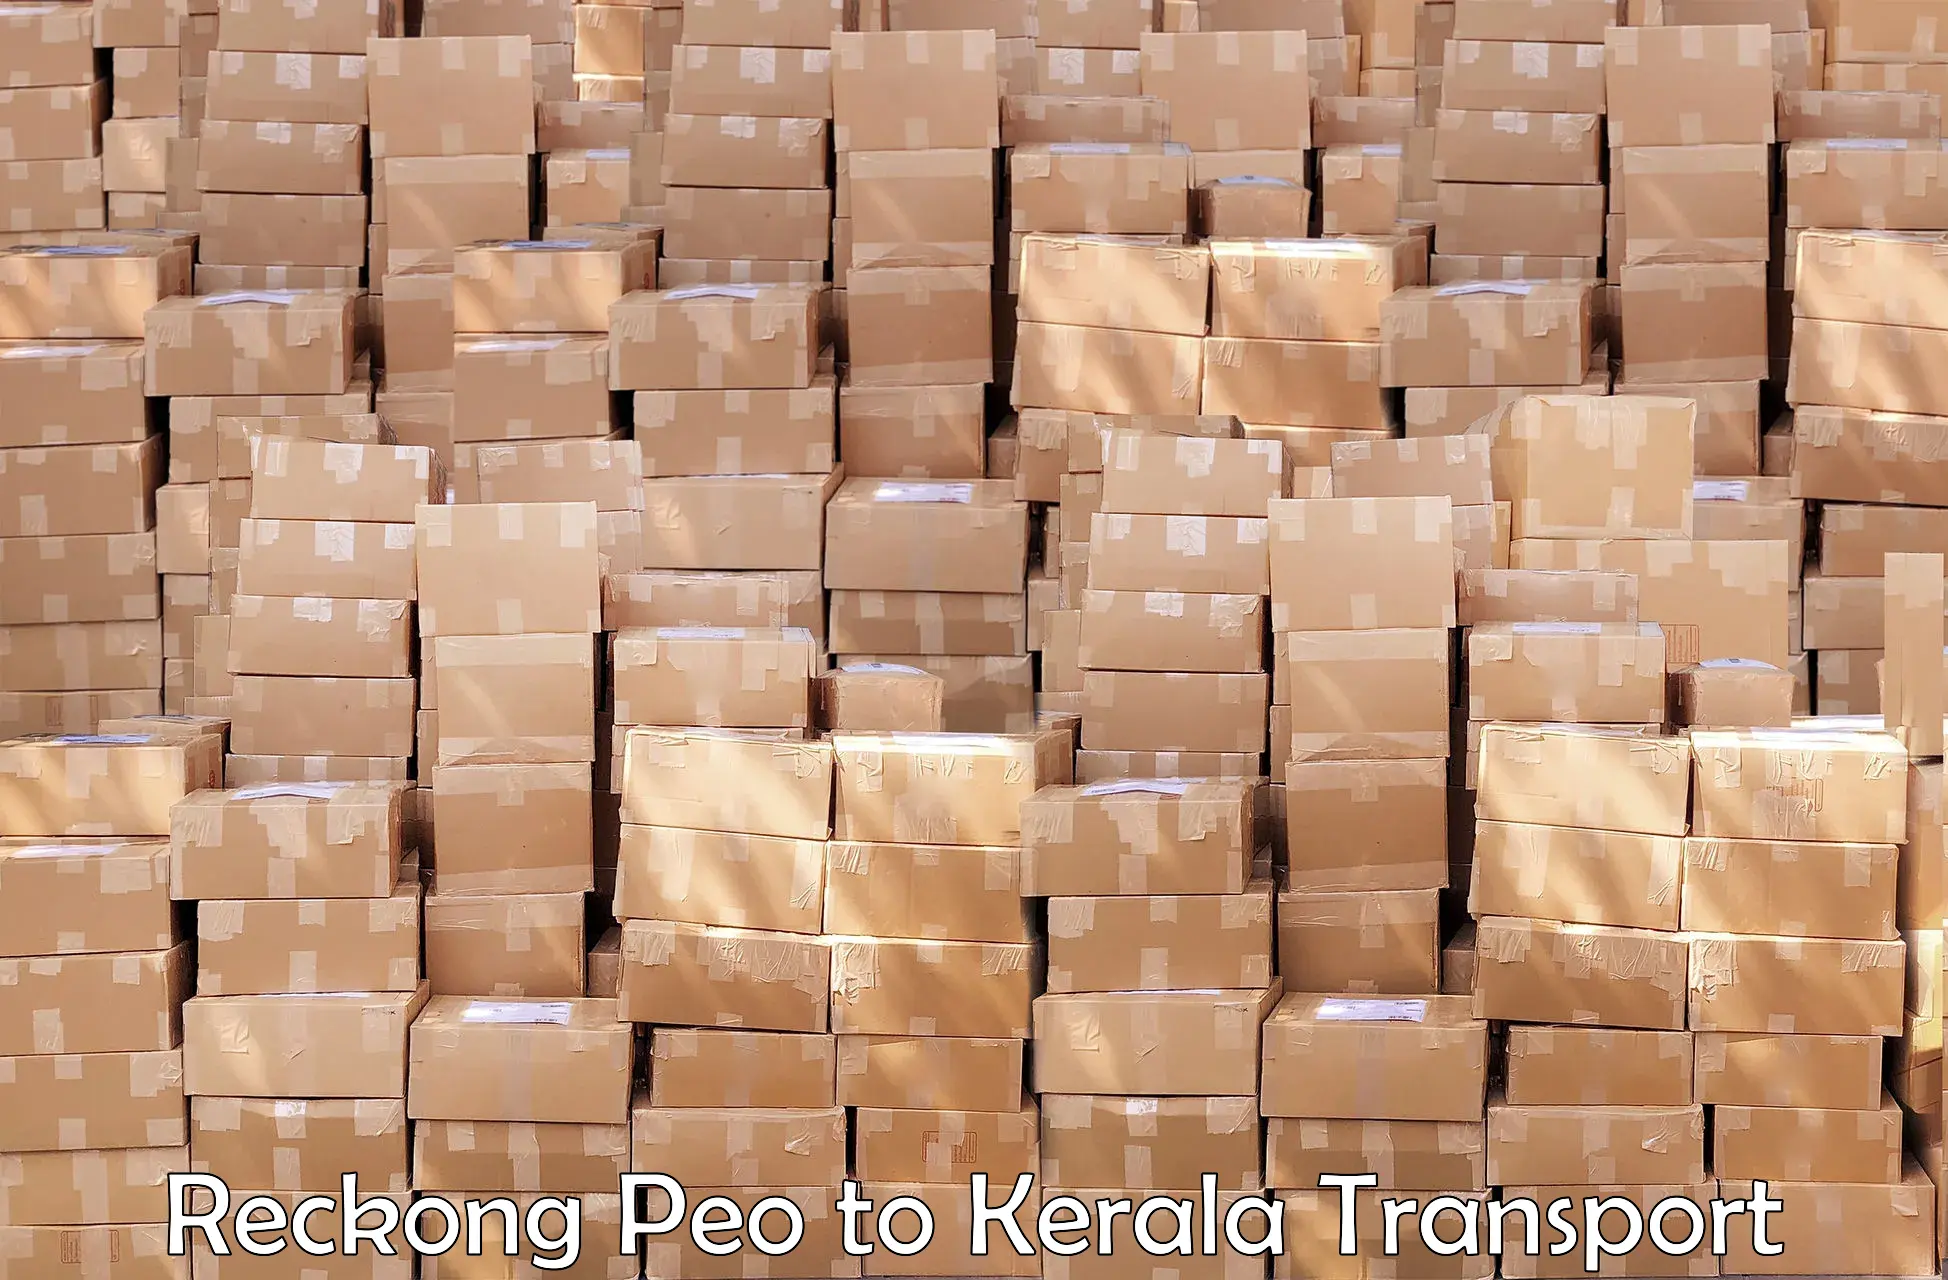 Transport shared services Reckong Peo to Koothattukulam